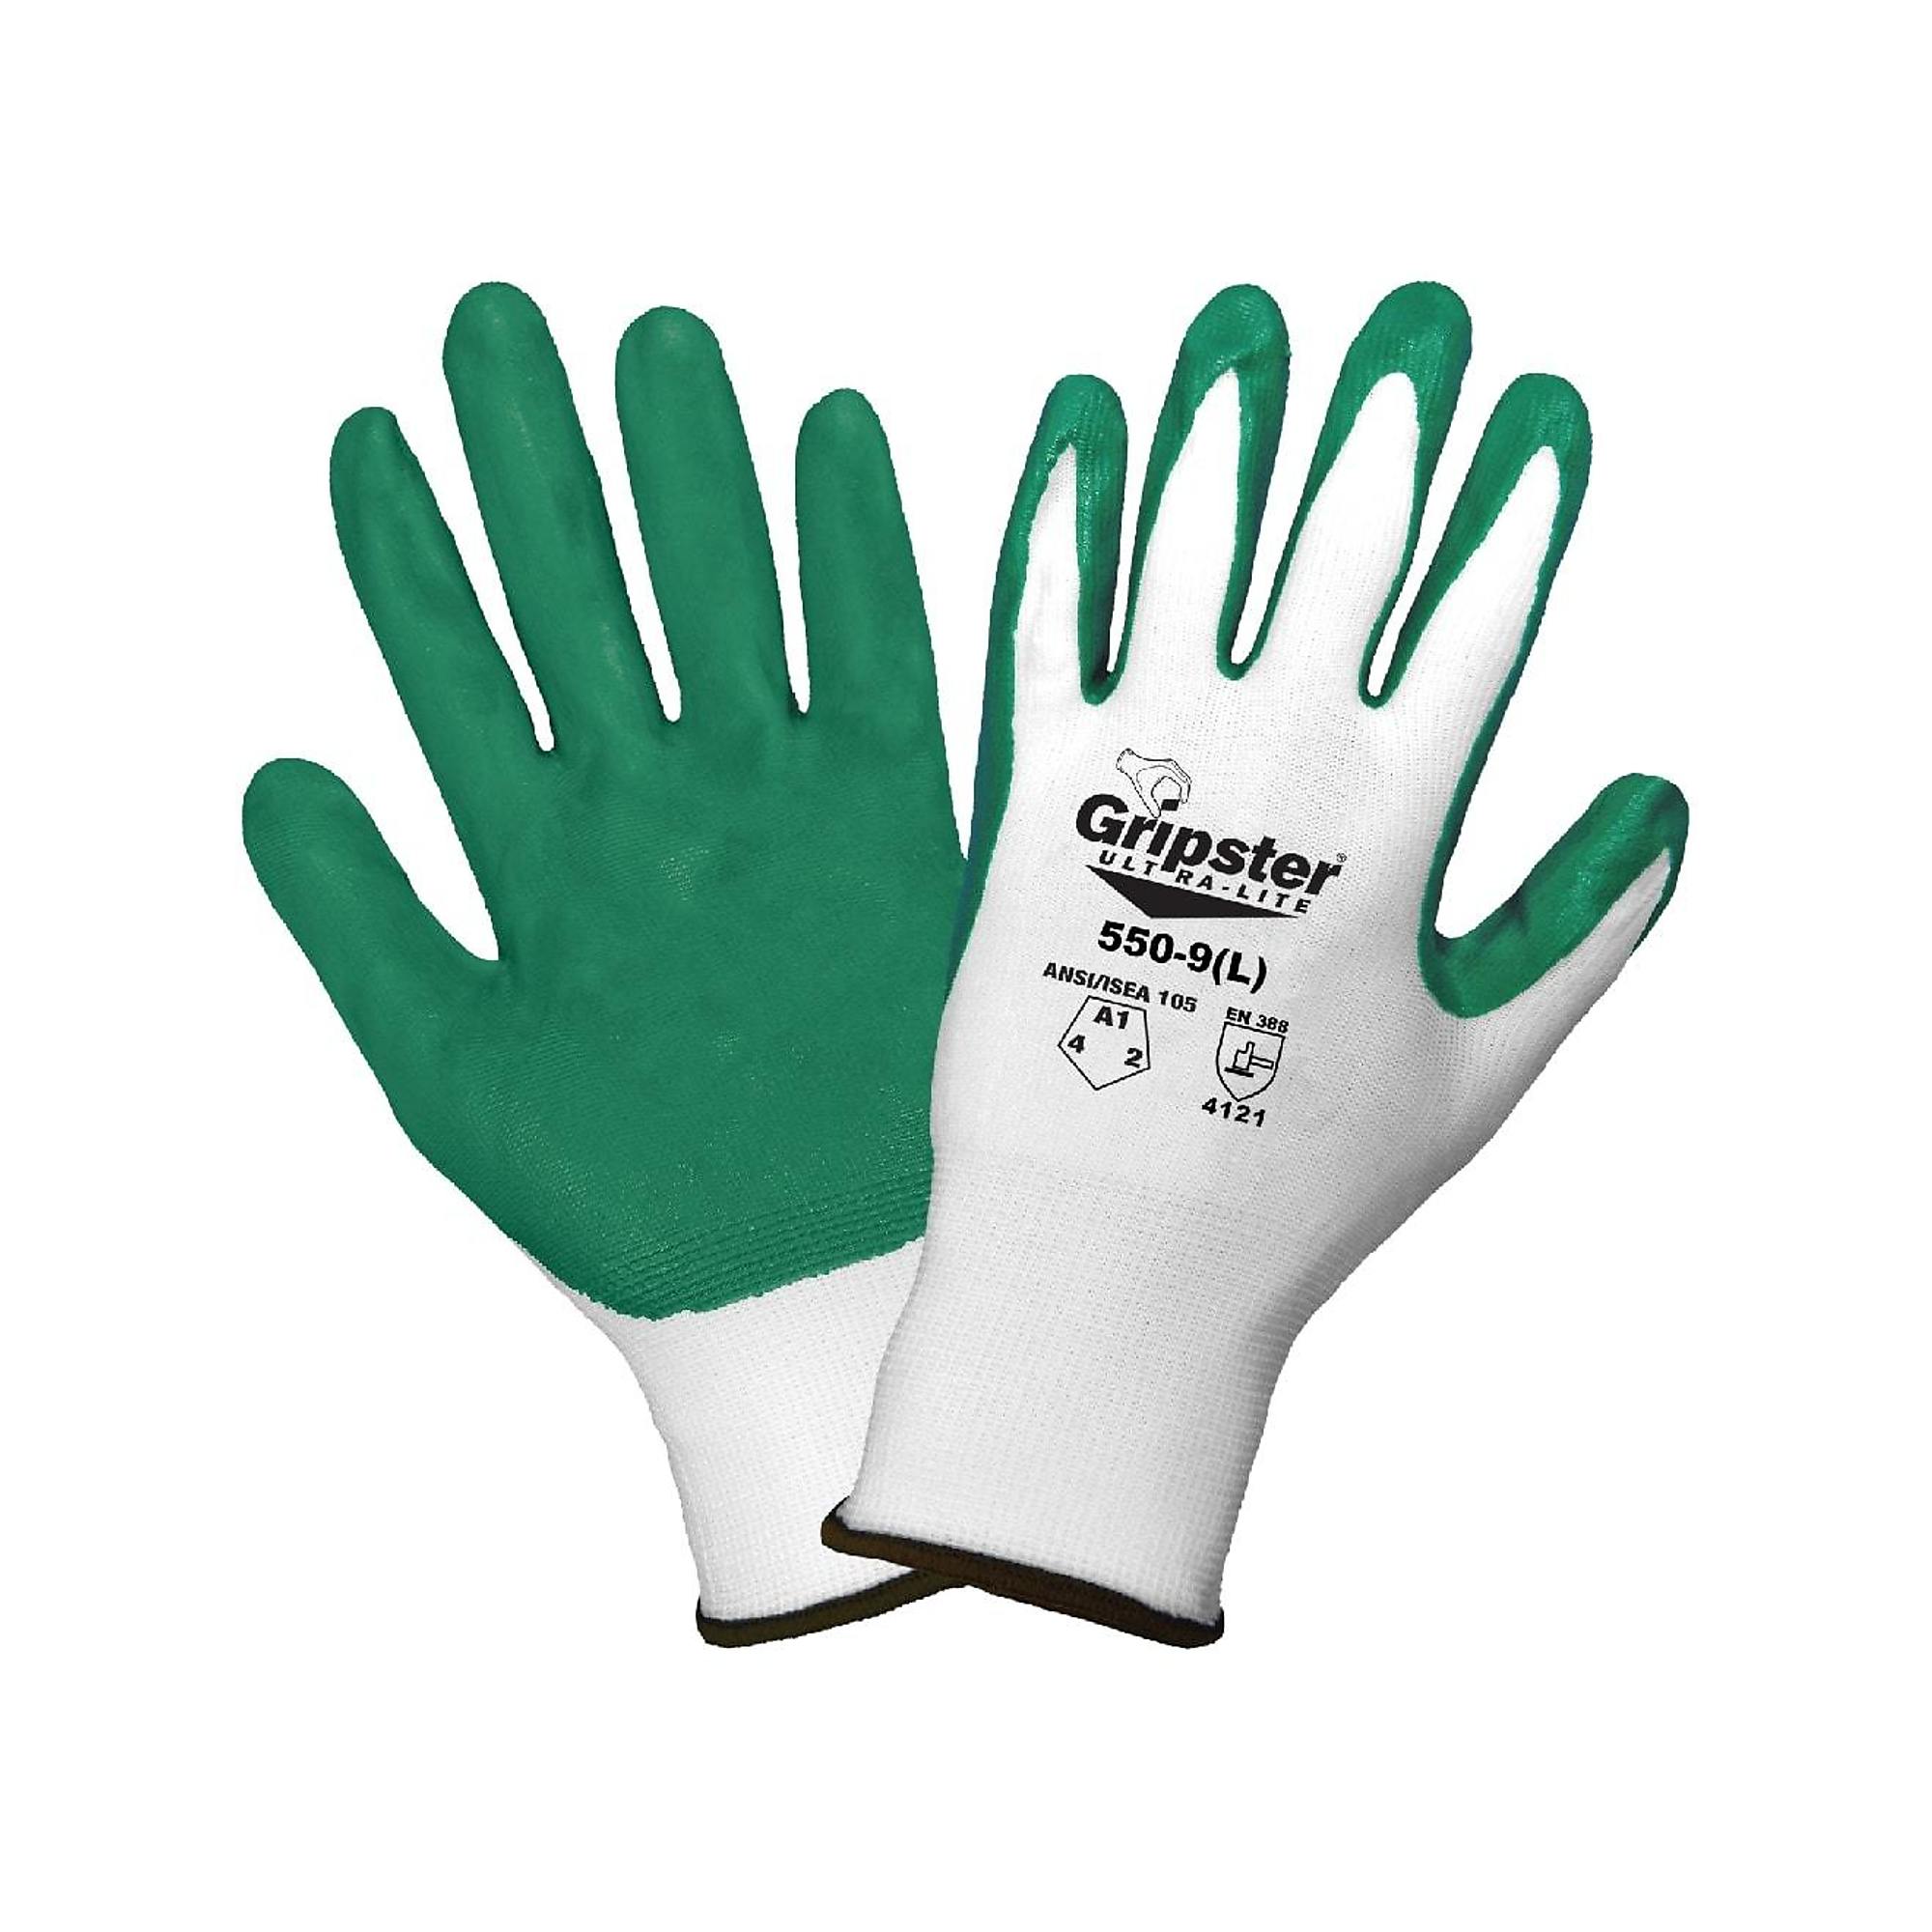 Global Glove Gripster , Solid Nitrile Coated Nylon Gloves - 12 Pairs, Size XL, Color White/Green, Included (qty.) 12 Model 550-10(XL)